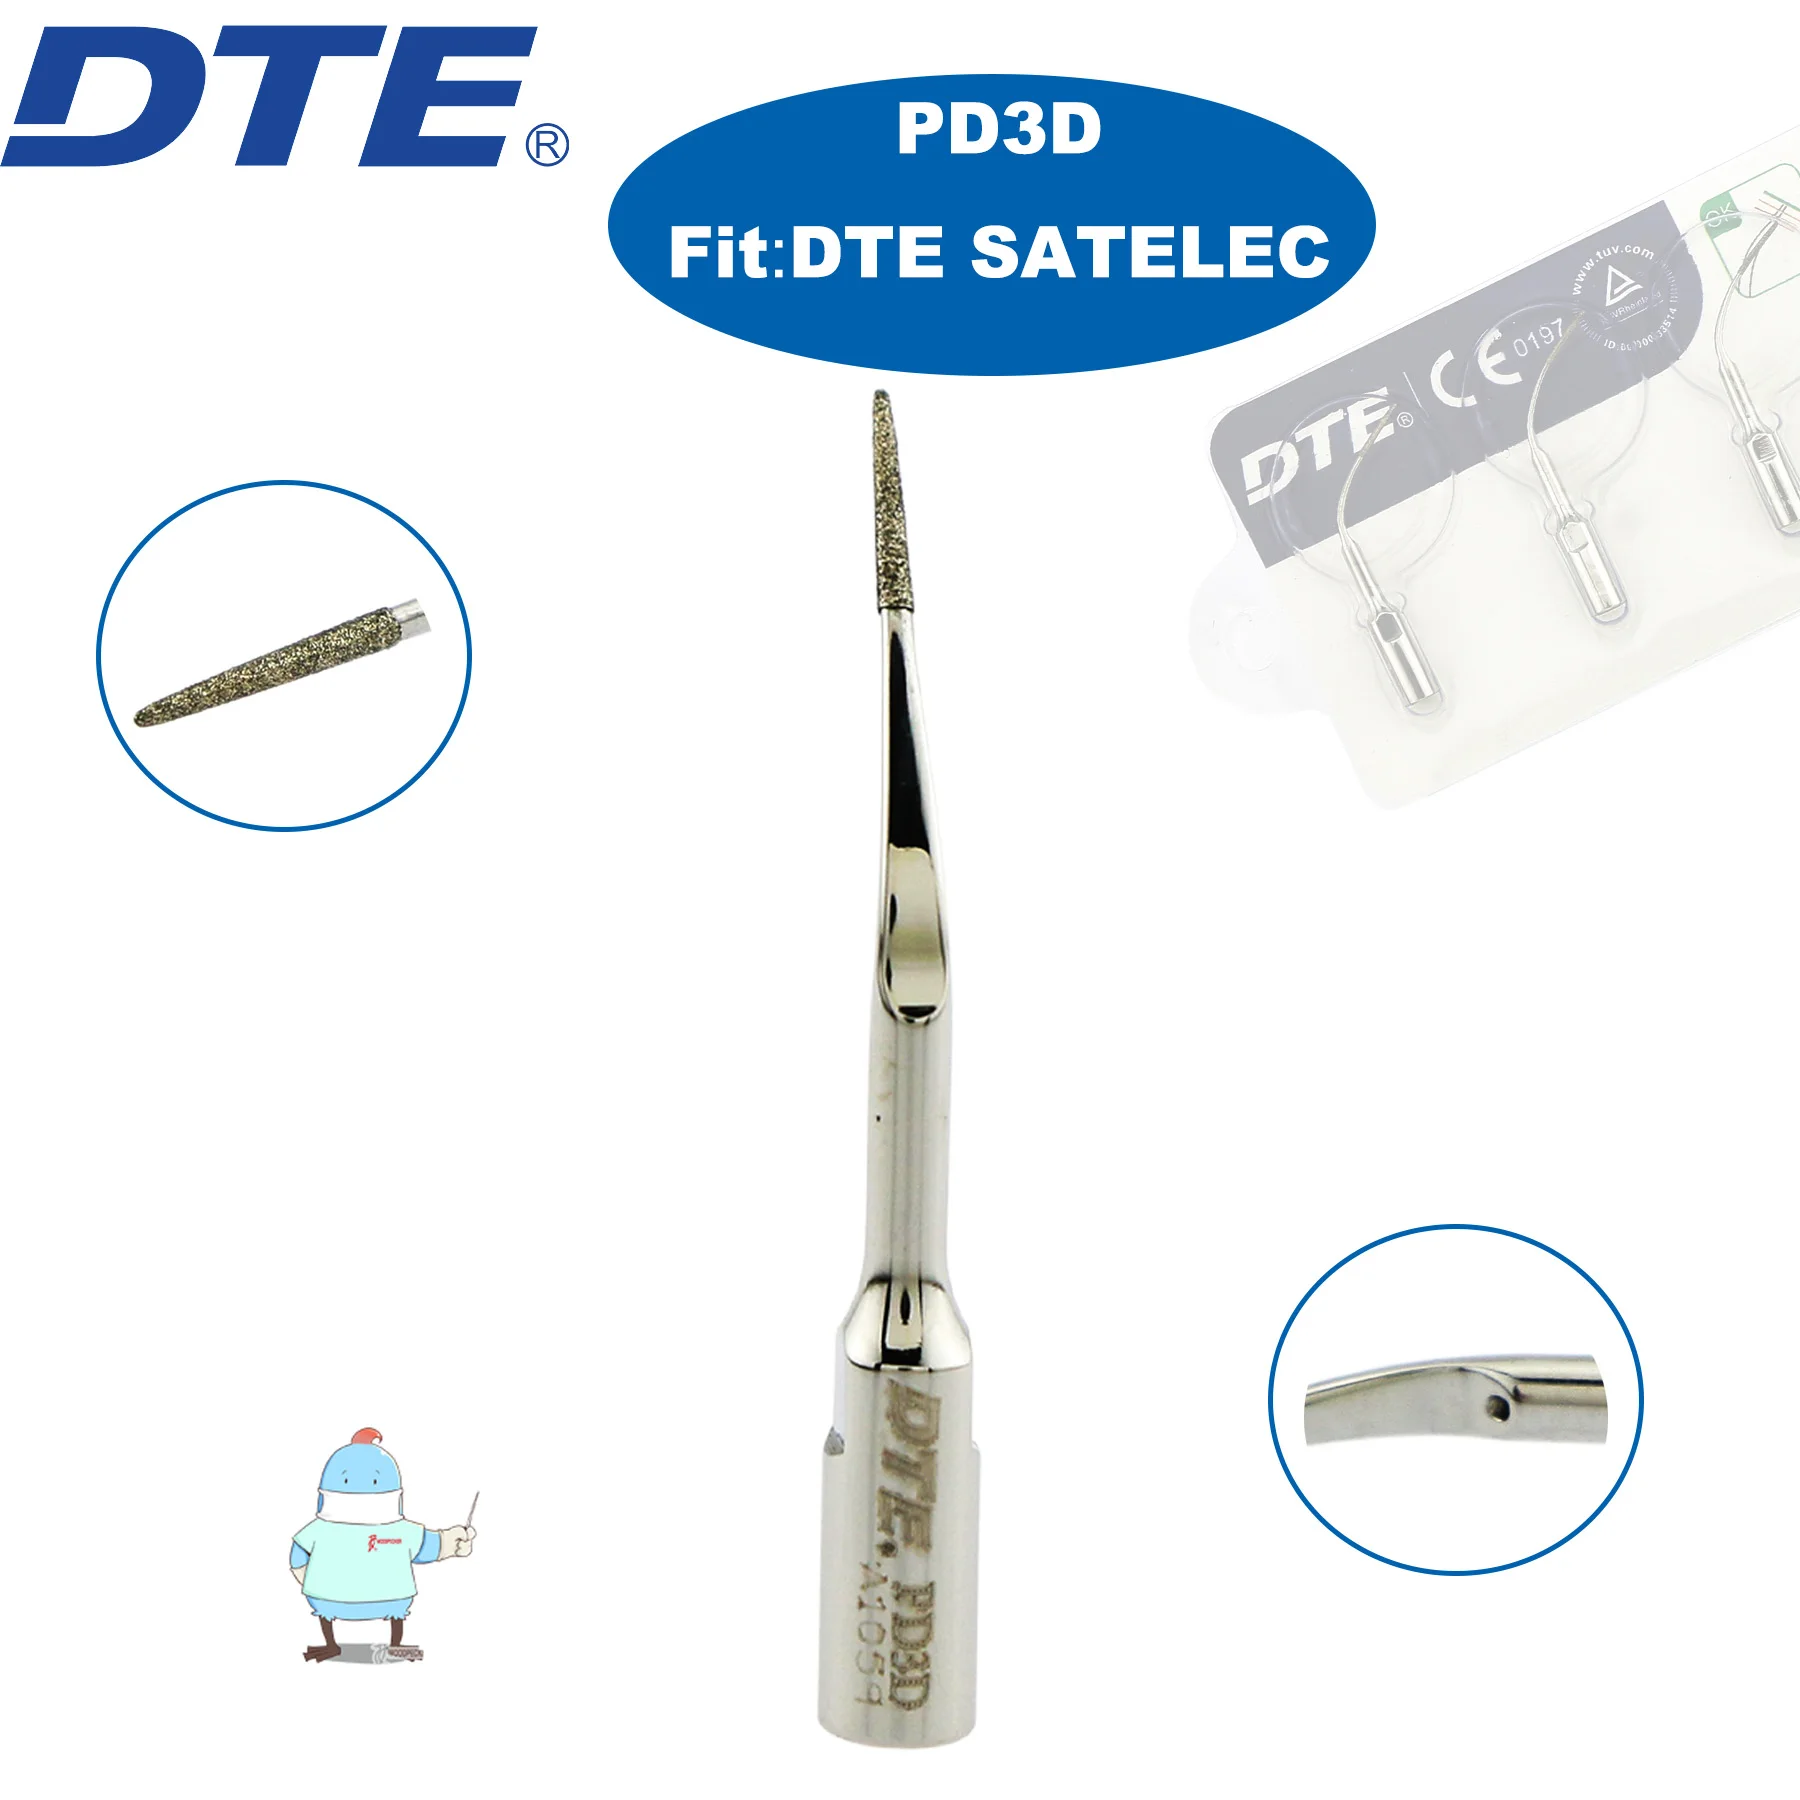 

Woodpecker DTE Dental Ultrasonic Scaler Tip Scaling Tips PD3D Diamond Coated For Periodontics Fit DTE SATELEC Scaler Handpiece